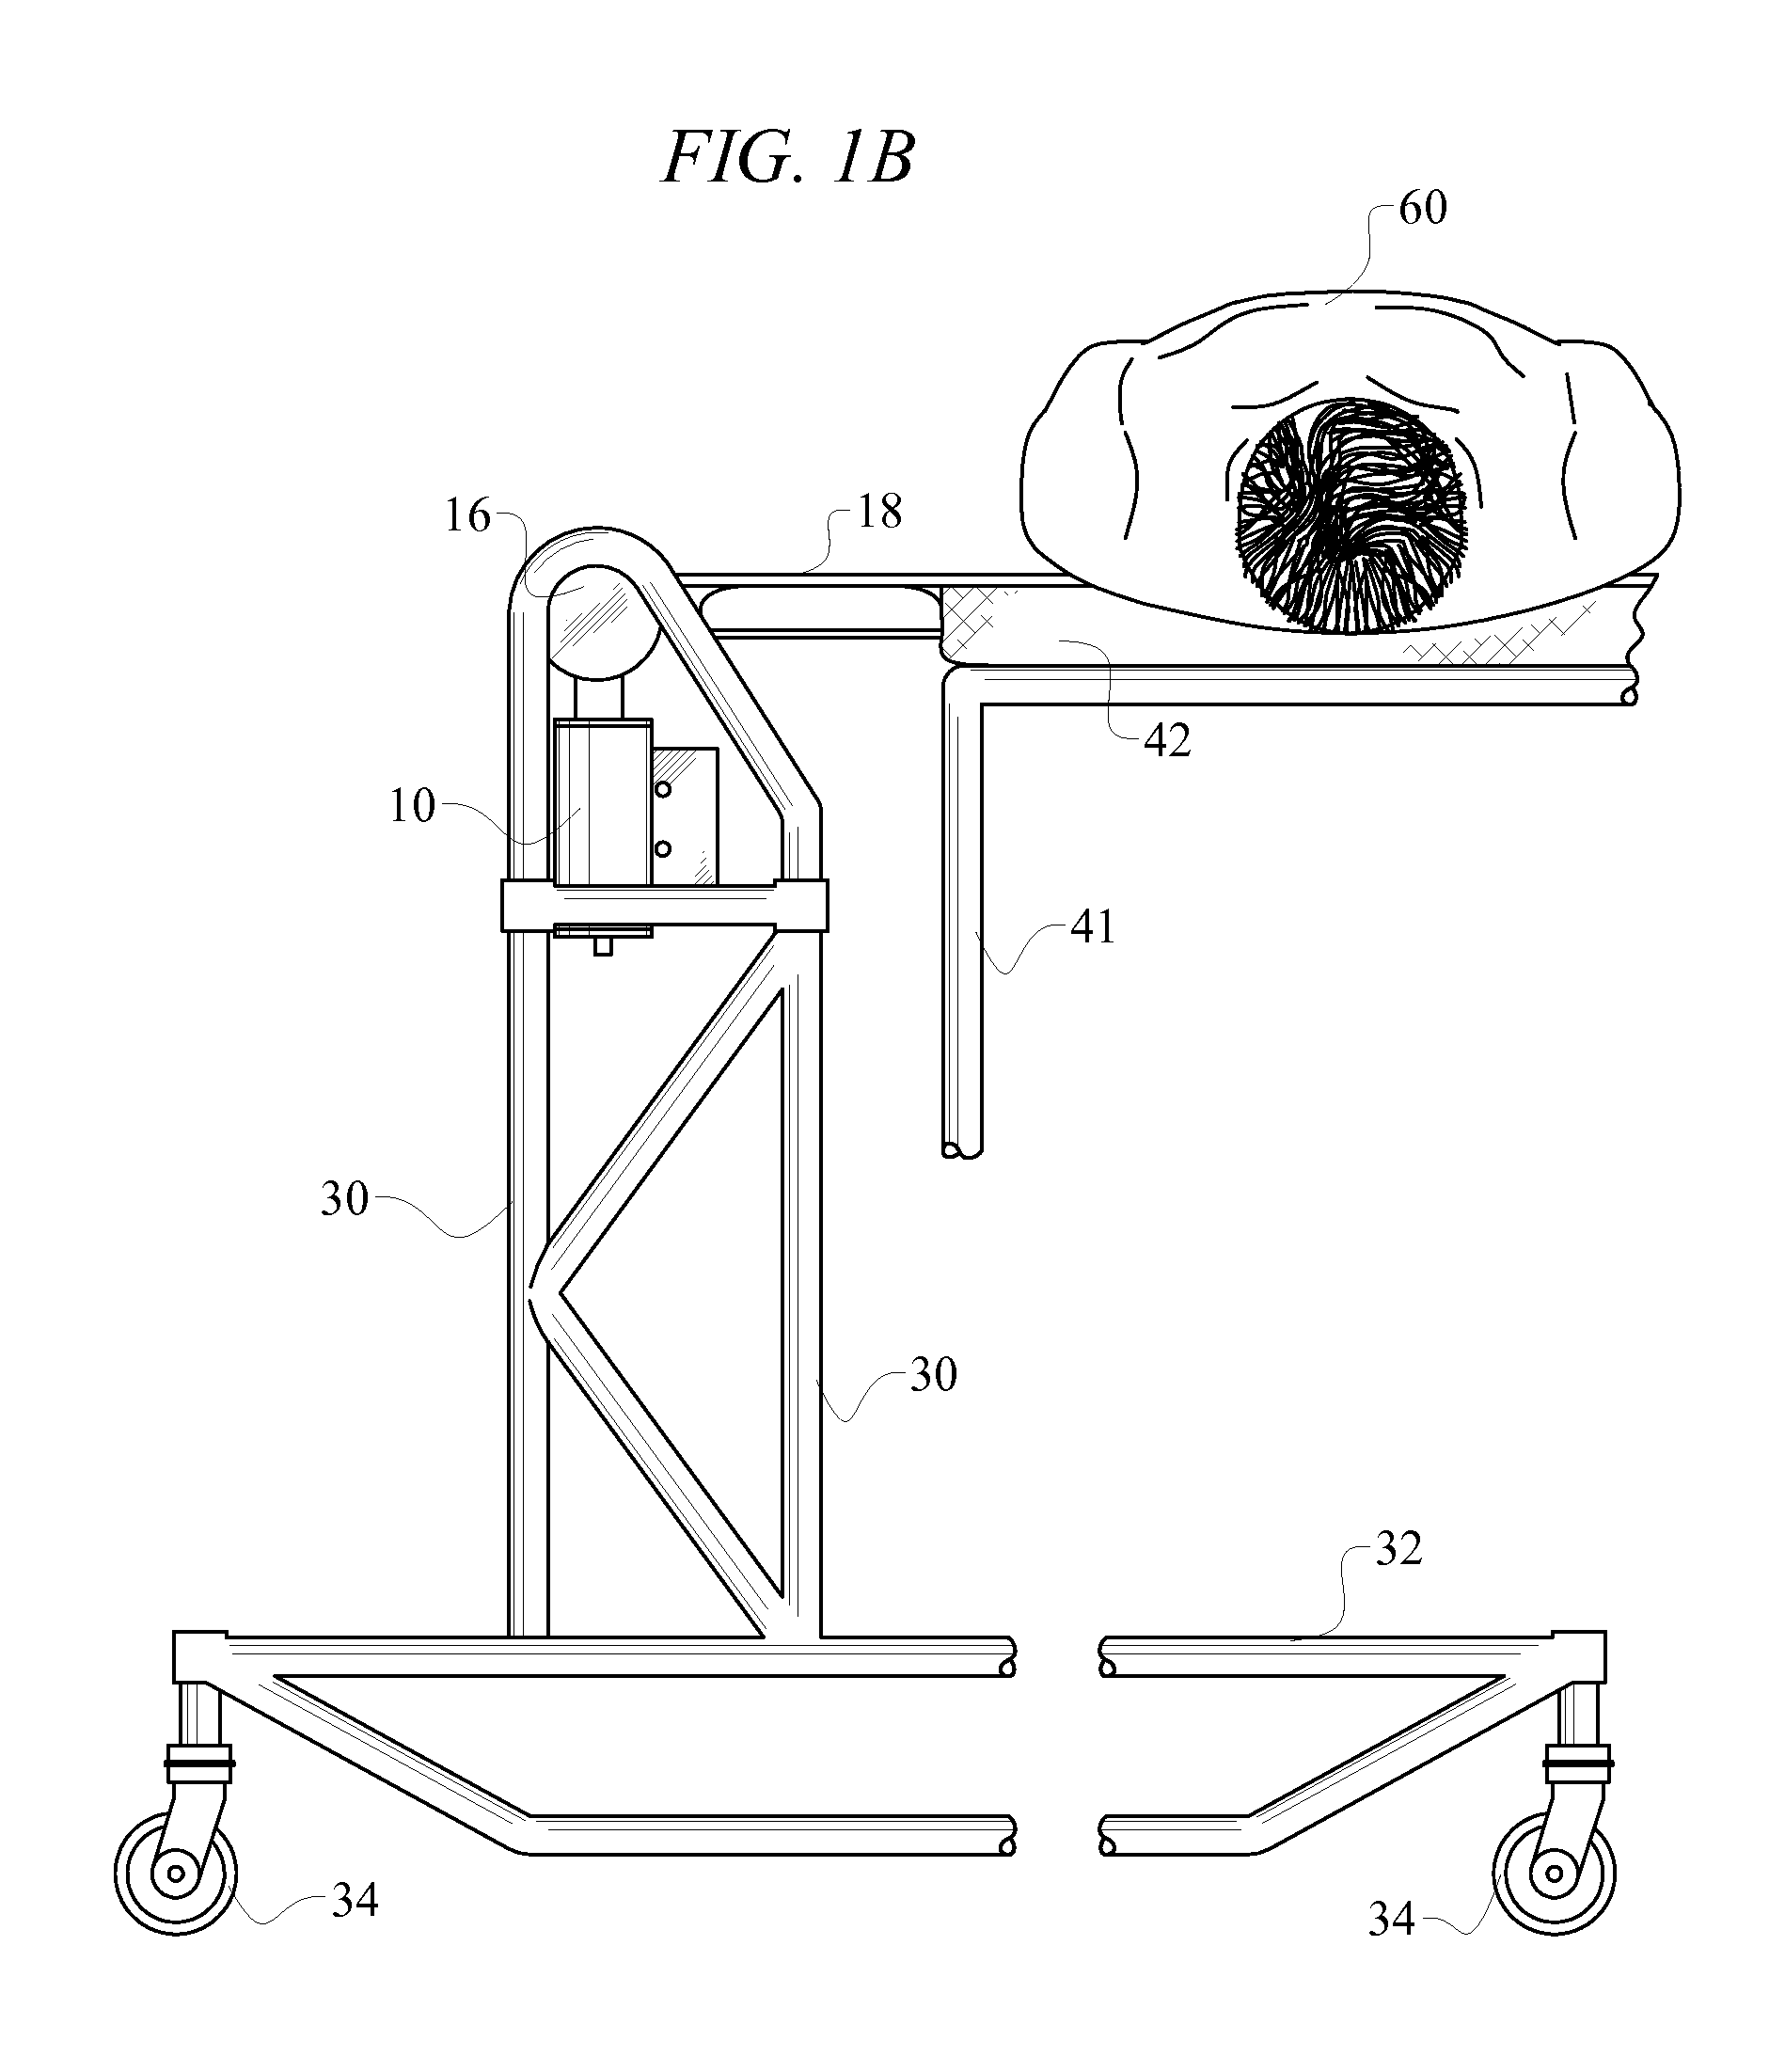 Method and apparatus for patient transfer